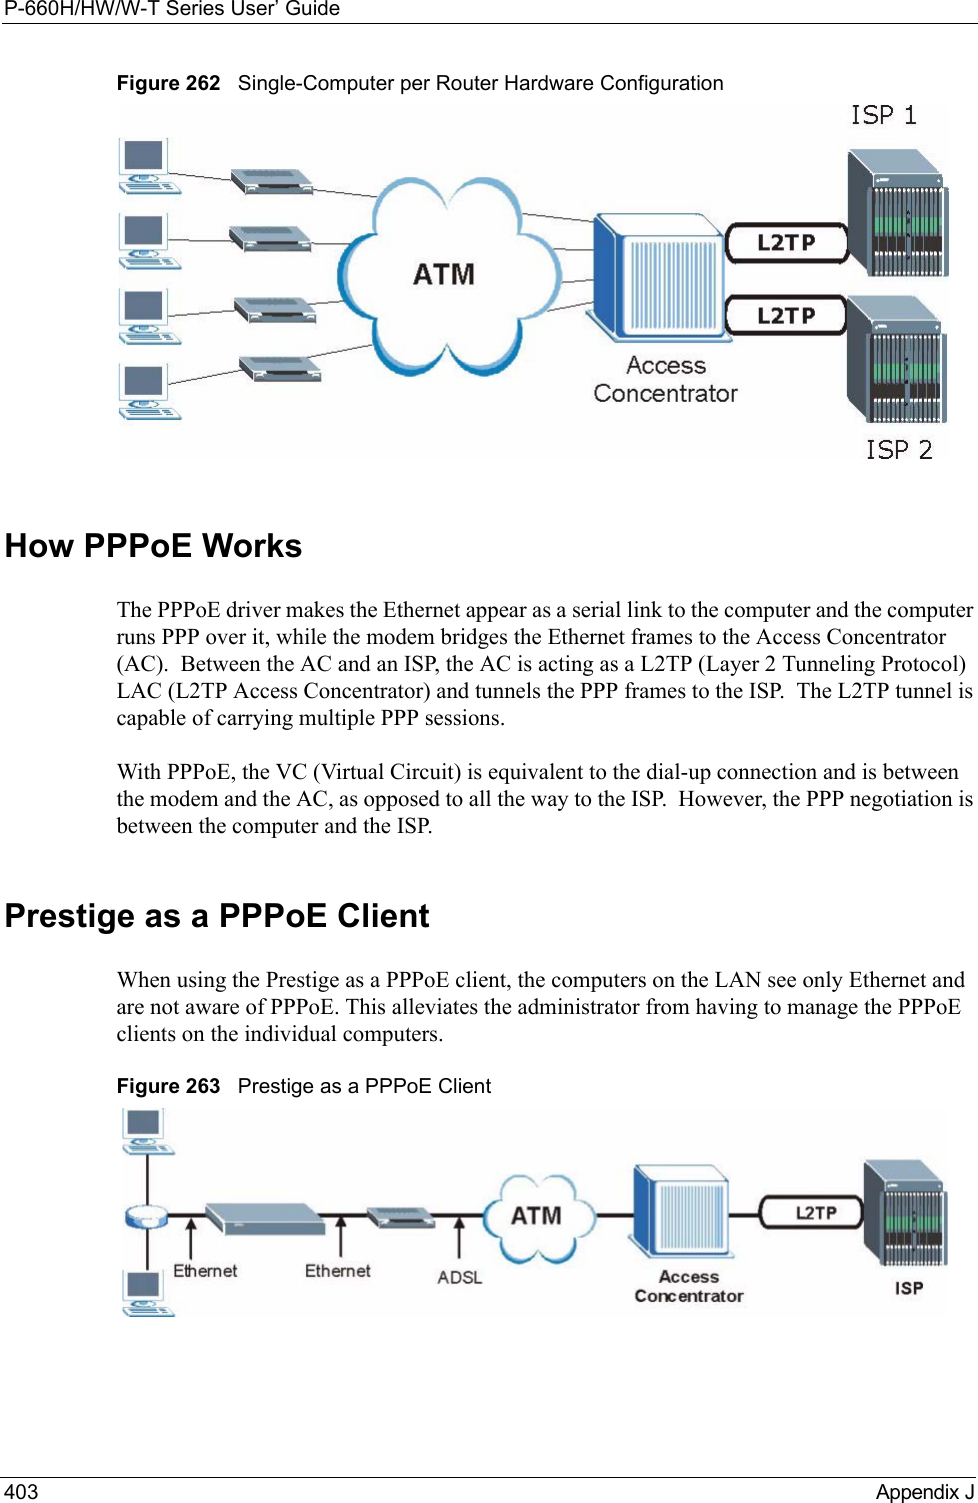 P-660H/HW/W-T Series User’ Guide403 Appendix JFigure 262   Single-Computer per Router Hardware ConfigurationHow PPPoE WorksThe PPPoE driver makes the Ethernet appear as a serial link to the computer and the computer runs PPP over it, while the modem bridges the Ethernet frames to the Access Concentrator (AC).  Between the AC and an ISP, the AC is acting as a L2TP (Layer 2 Tunneling Protocol) LAC (L2TP Access Concentrator) and tunnels the PPP frames to the ISP.  The L2TP tunnel is capable of carrying multiple PPP sessions.With PPPoE, the VC (Virtual Circuit) is equivalent to the dial-up connection and is between the modem and the AC, as opposed to all the way to the ISP.  However, the PPP negotiation is between the computer and the ISP. Prestige as a PPPoE ClientWhen using the Prestige as a PPPoE client, the computers on the LAN see only Ethernet and are not aware of PPPoE. This alleviates the administrator from having to manage the PPPoE clients on the individual computers.Figure 263   Prestige as a PPPoE Client